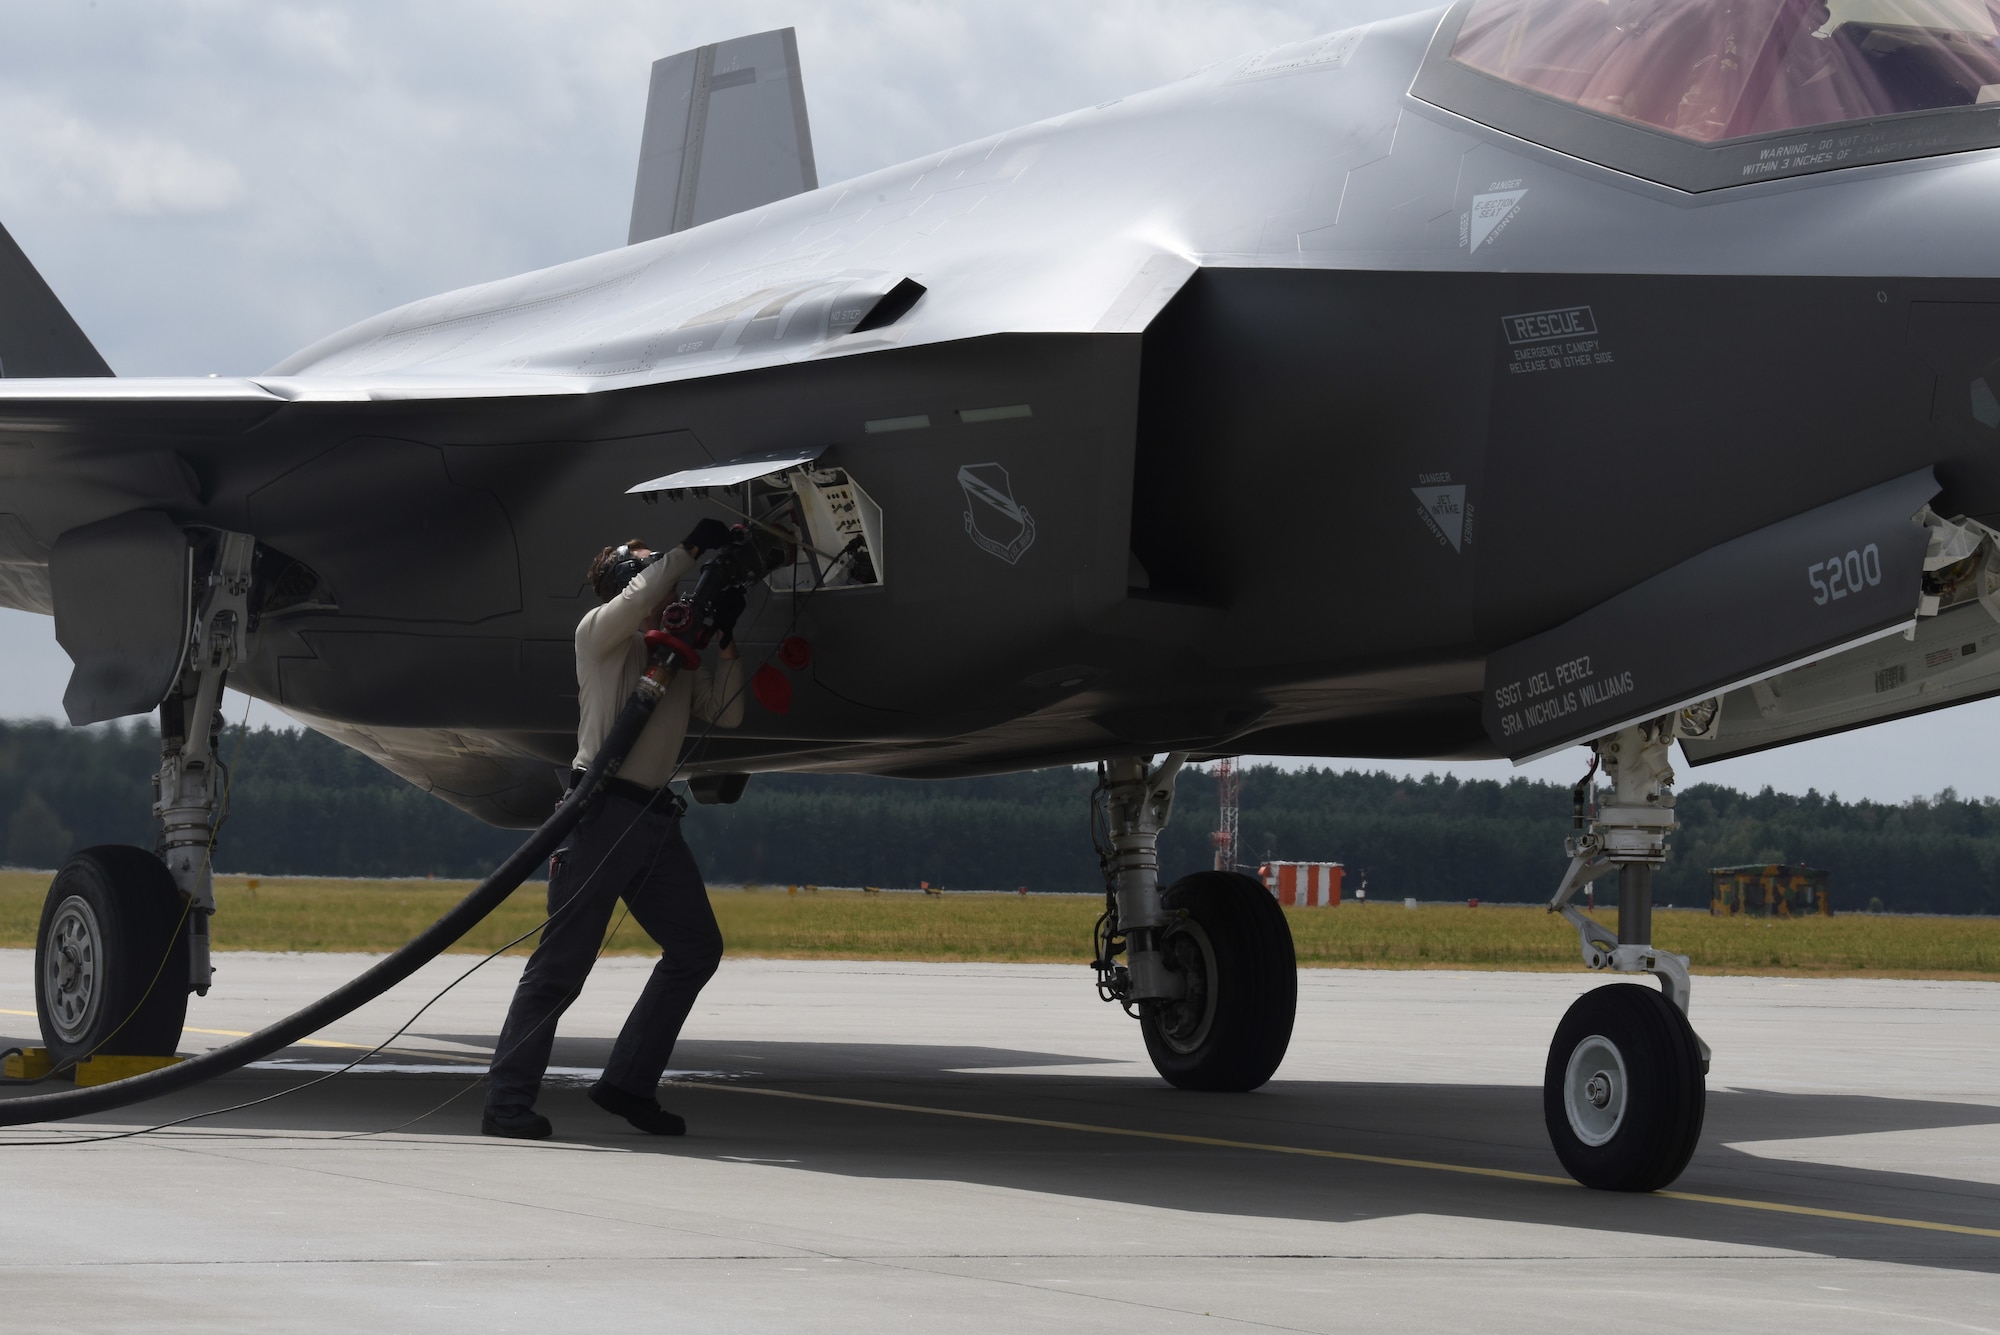 A U.S. Air Force member from the 336th Fighter Squadron, 4th Fighter Wing, Seymour Johnson Air Force Base, N.C., refuels a F-35A Lightning II fighter jet during Operation Rapid Forge on Powidz Air Base, Poland, July, 16, 2019. Operation Rapid Forge is intended to enhance interoperability with NATO allies to improve combined operational capabilities.